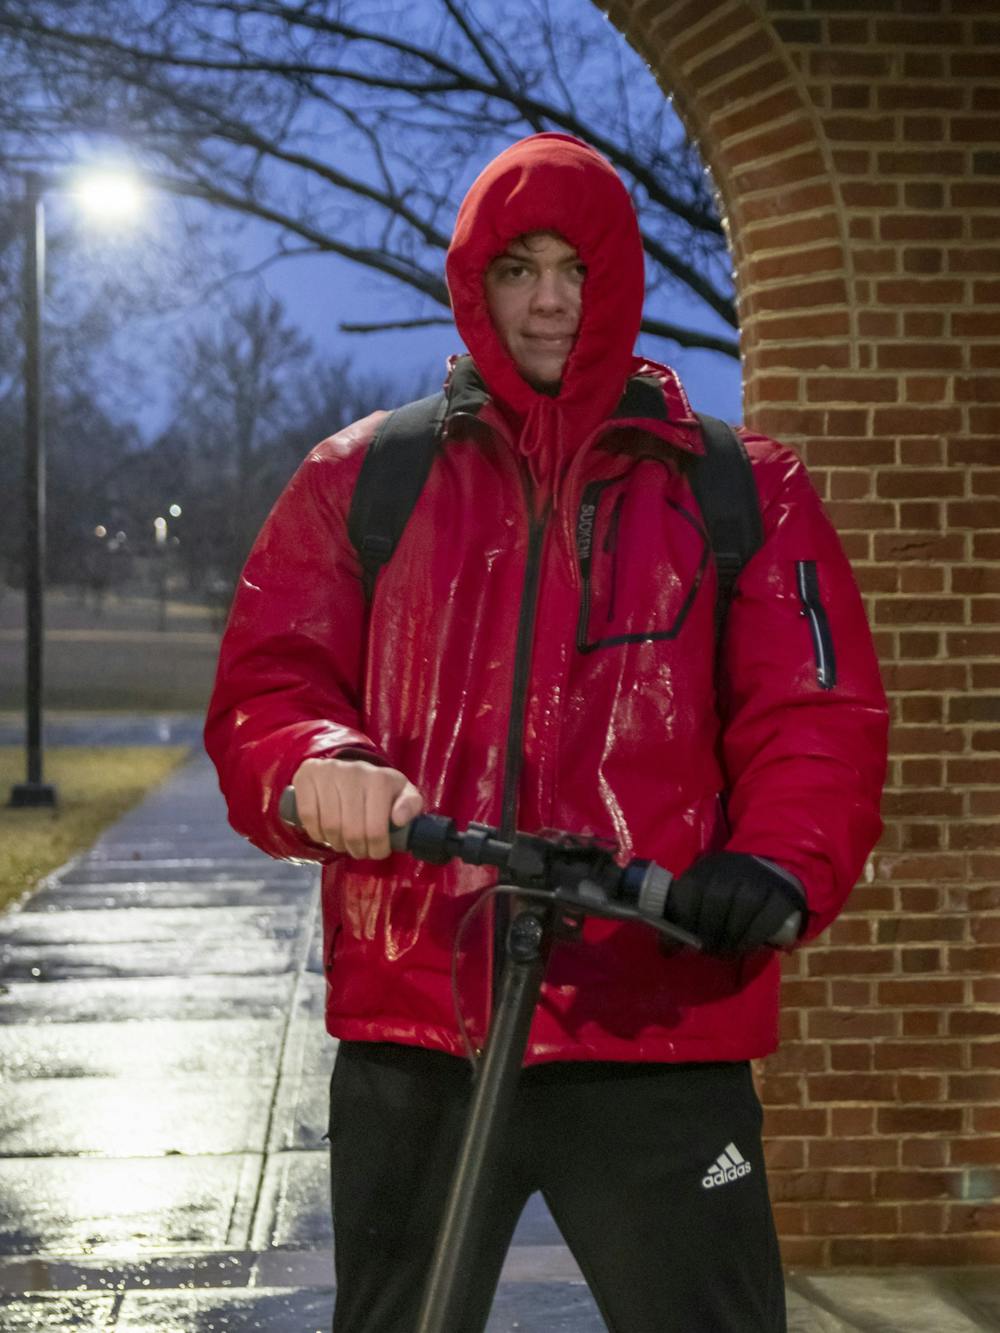 Andrew Kutte, first-year accounting major, braved the rain to make a Snag delivery on Feb. 14.